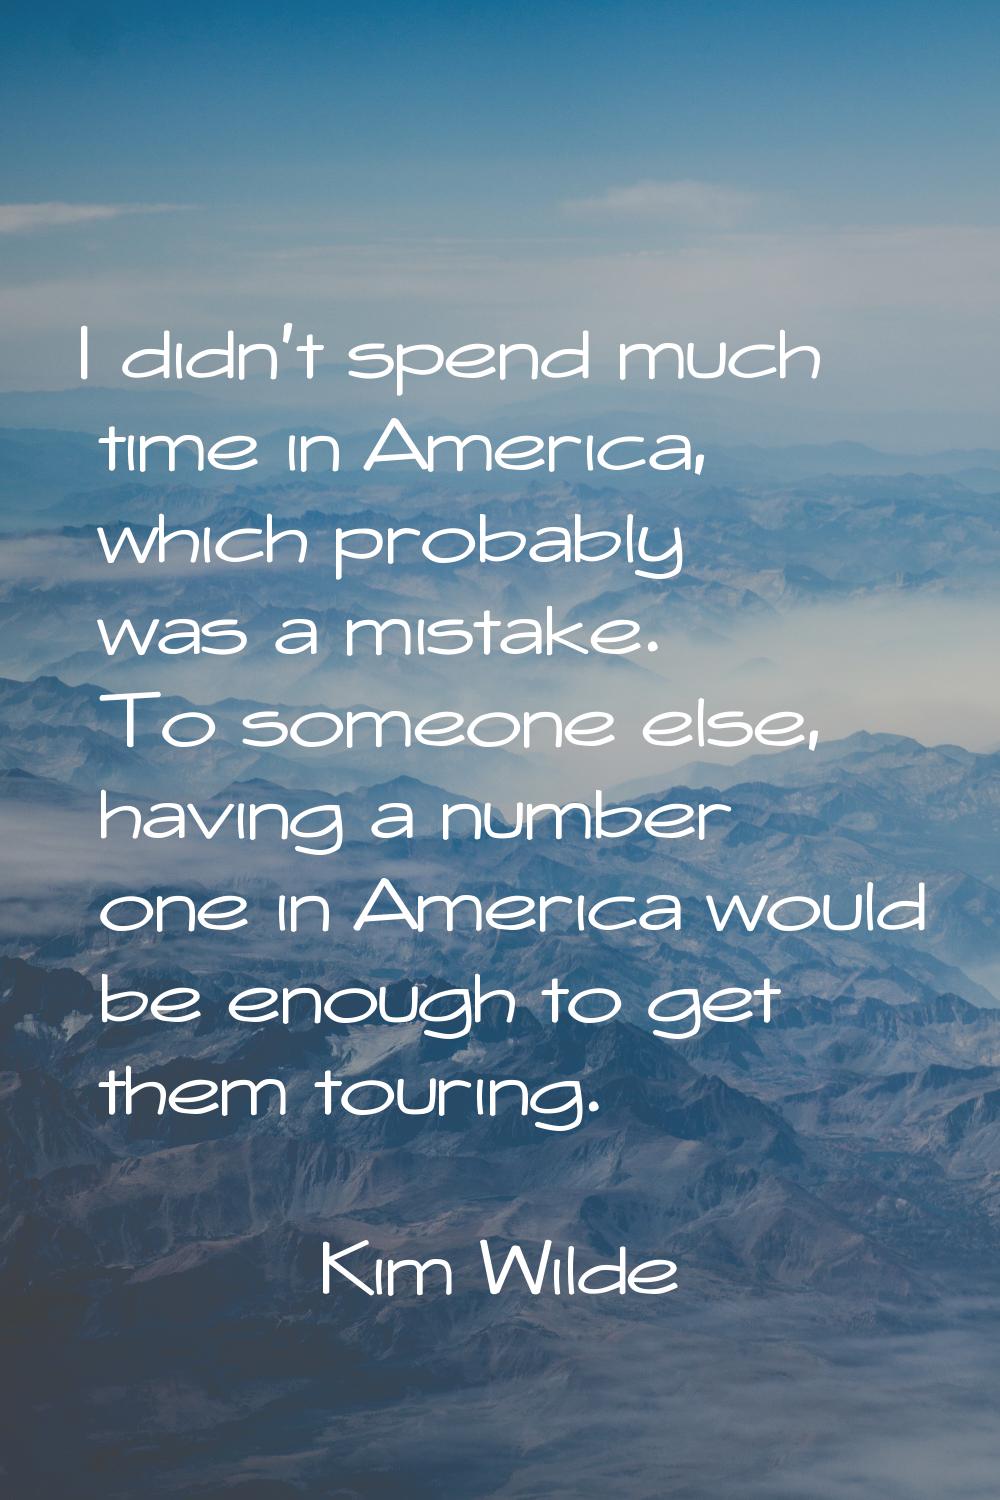 I didn't spend much time in America, which probably was a mistake. To someone else, having a number